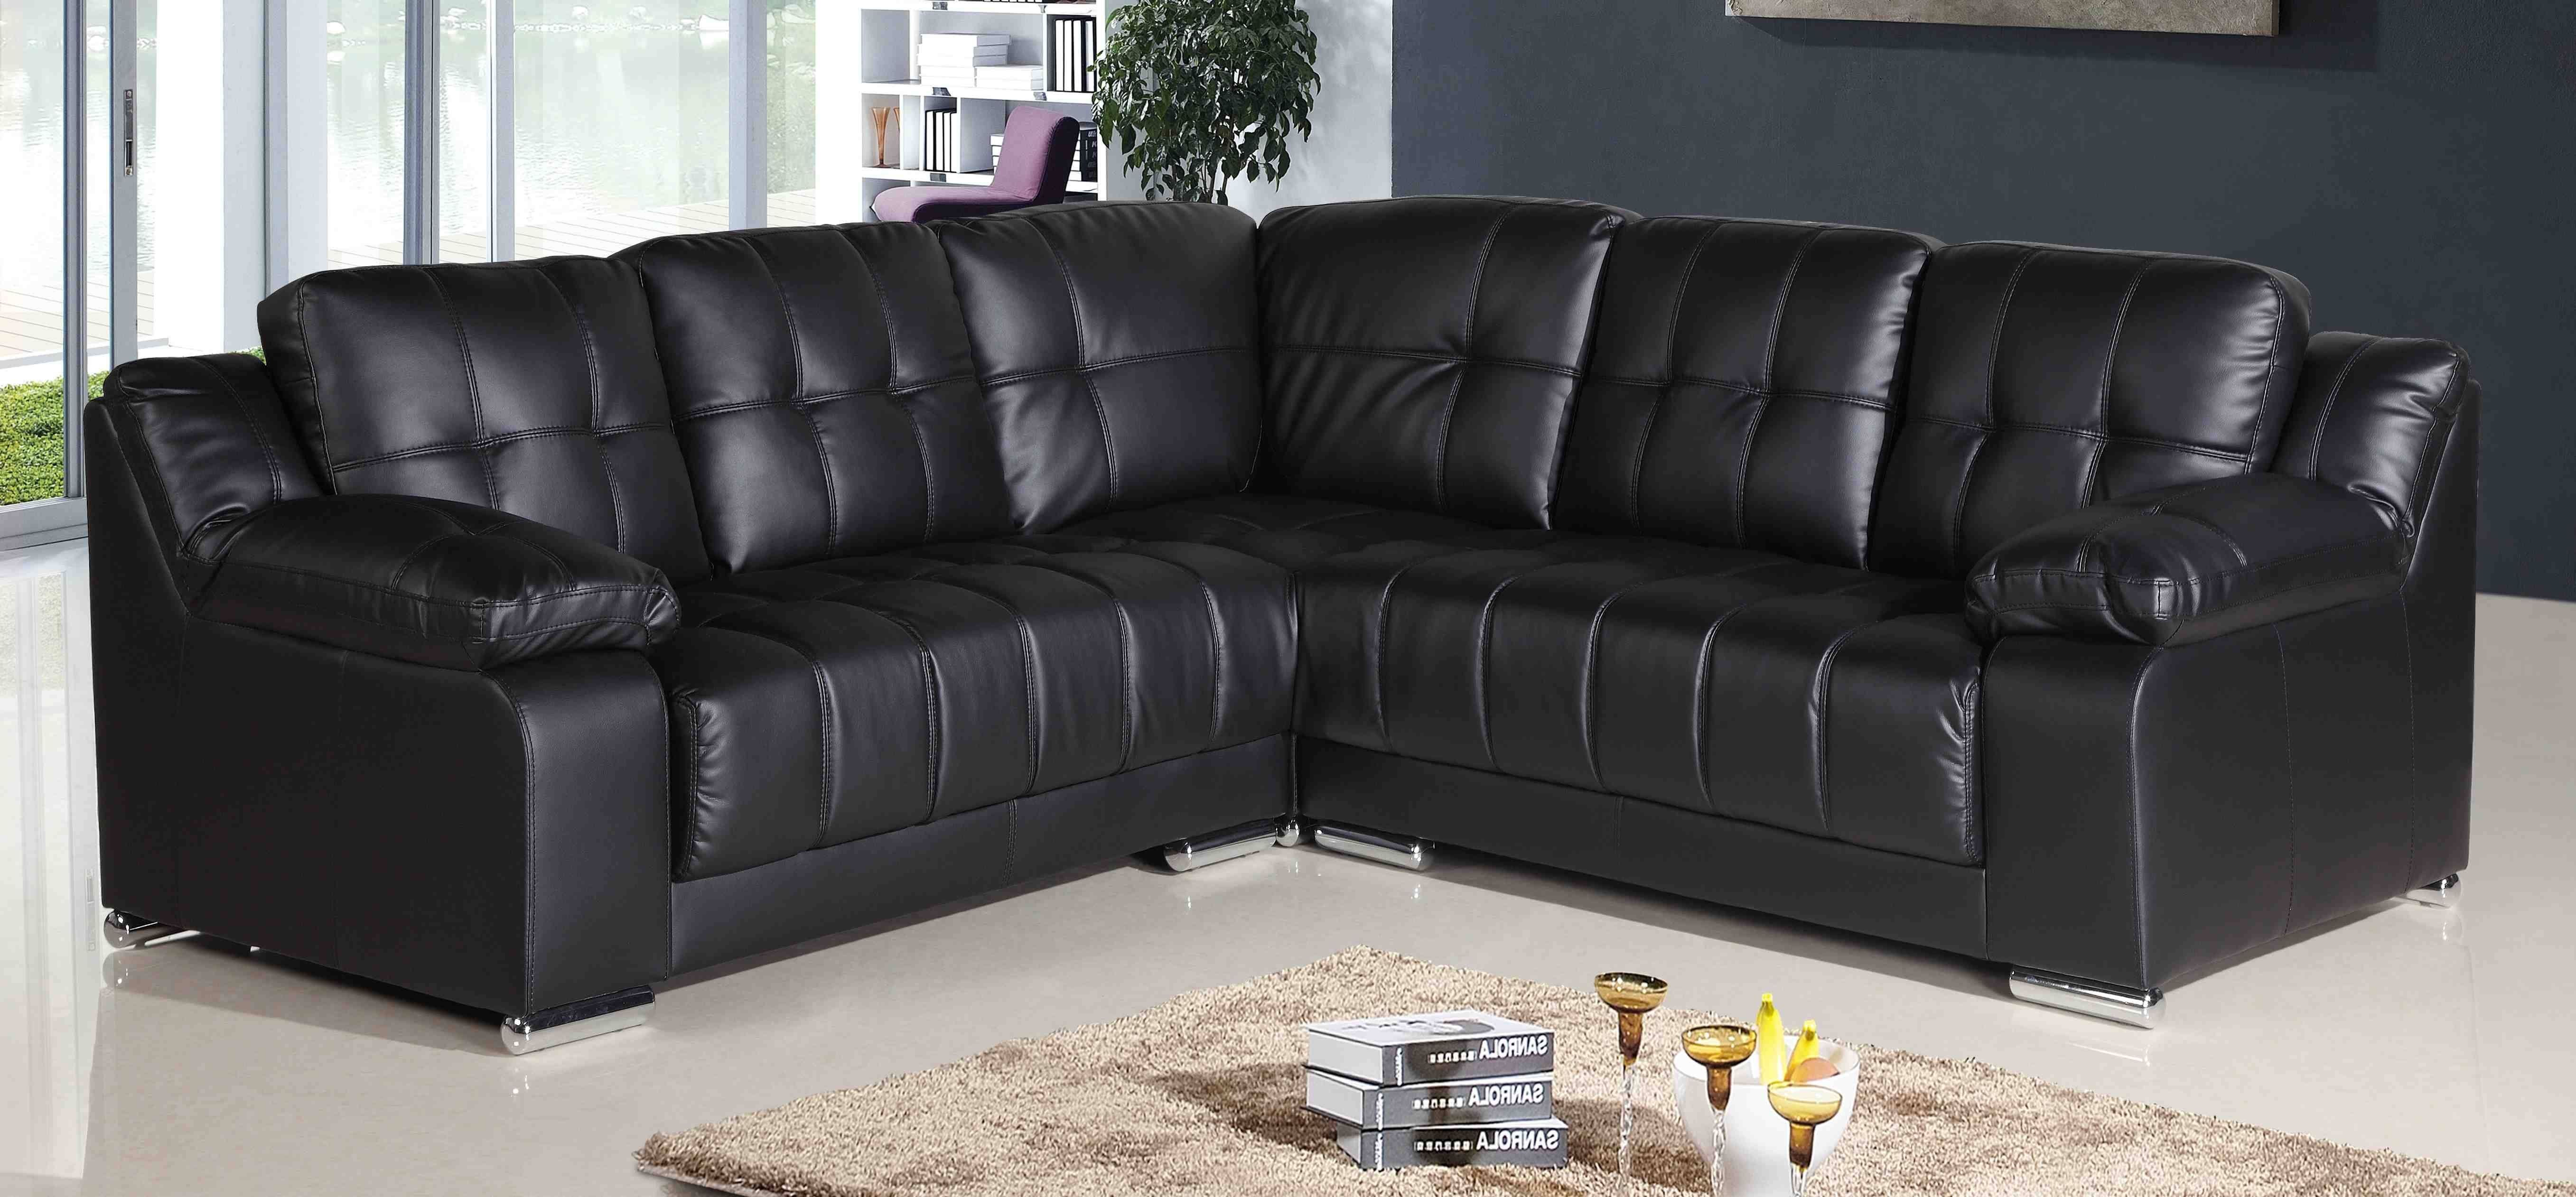 Cheap Leather Corner Sofa For Sale London, Black Leather Sofa Corner Regarding Corner Sofa Leather (View 5 of 30)